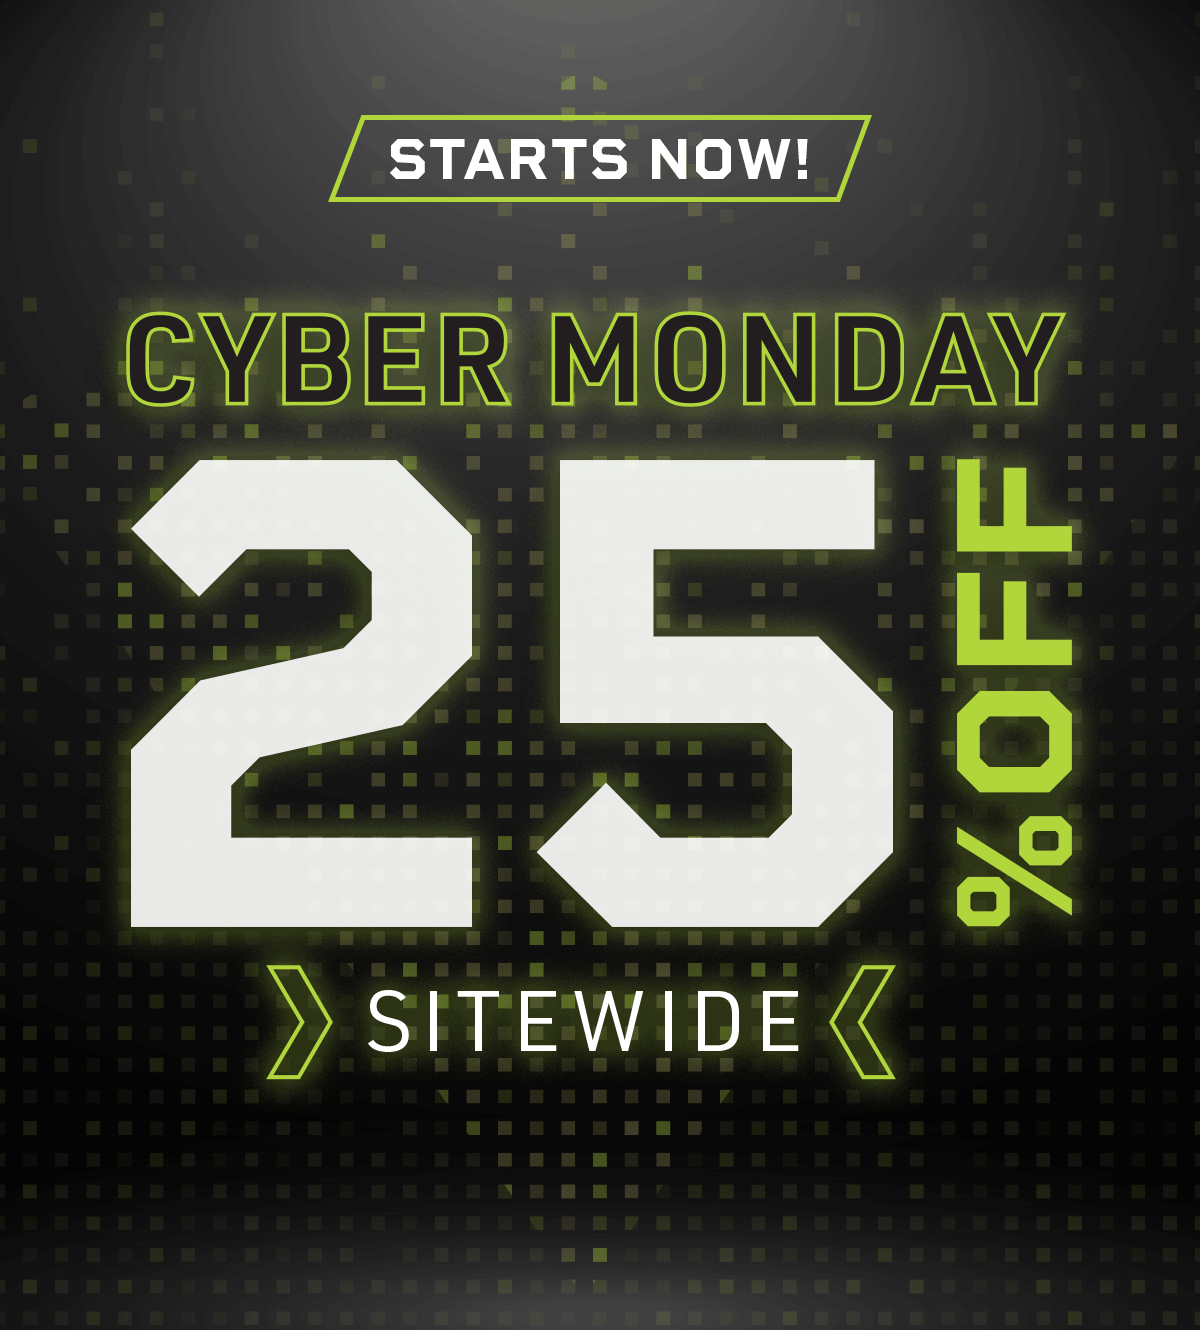 Cyber Monday - Starts Now